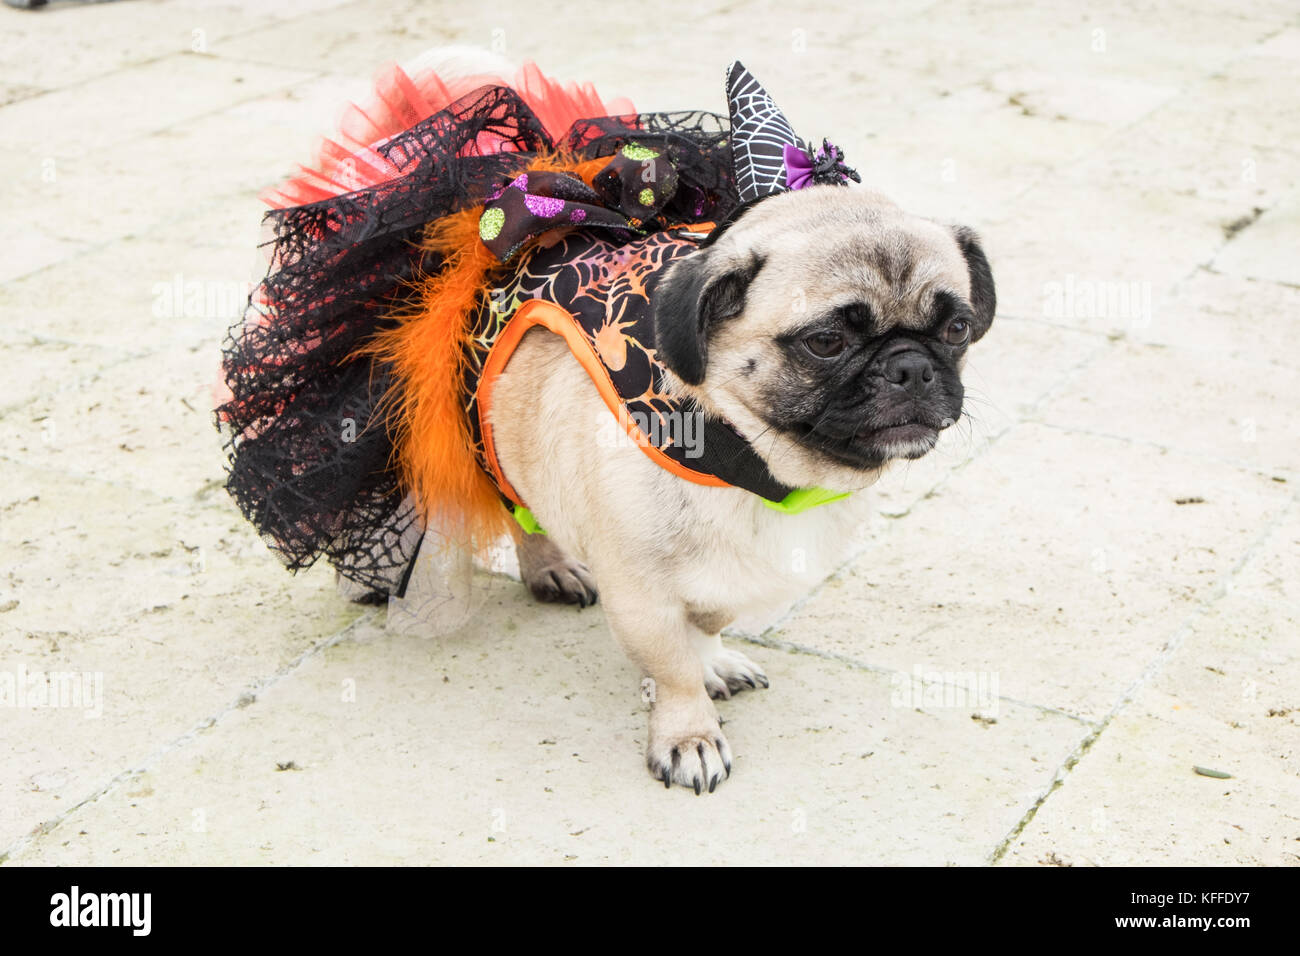 This pug,Elsa,aged,3 in January, from Essex,won Best in Show. Laugharne, Carmarthenshire, Wales UK. 28th Oct, 2017. PugFest Halloween event, held at Corran Resort and Spa,Laugharne, Carmarthenshire, Wales, U.K.The halloween pug dog show was organised by Pugfest a non profit organisation putting on events across UK to support animal welfare.Pugfest is a celebration of pugs and cross breeds and a family fun day. Credit: Paul Quayle/Alamy Live News Stock Photo